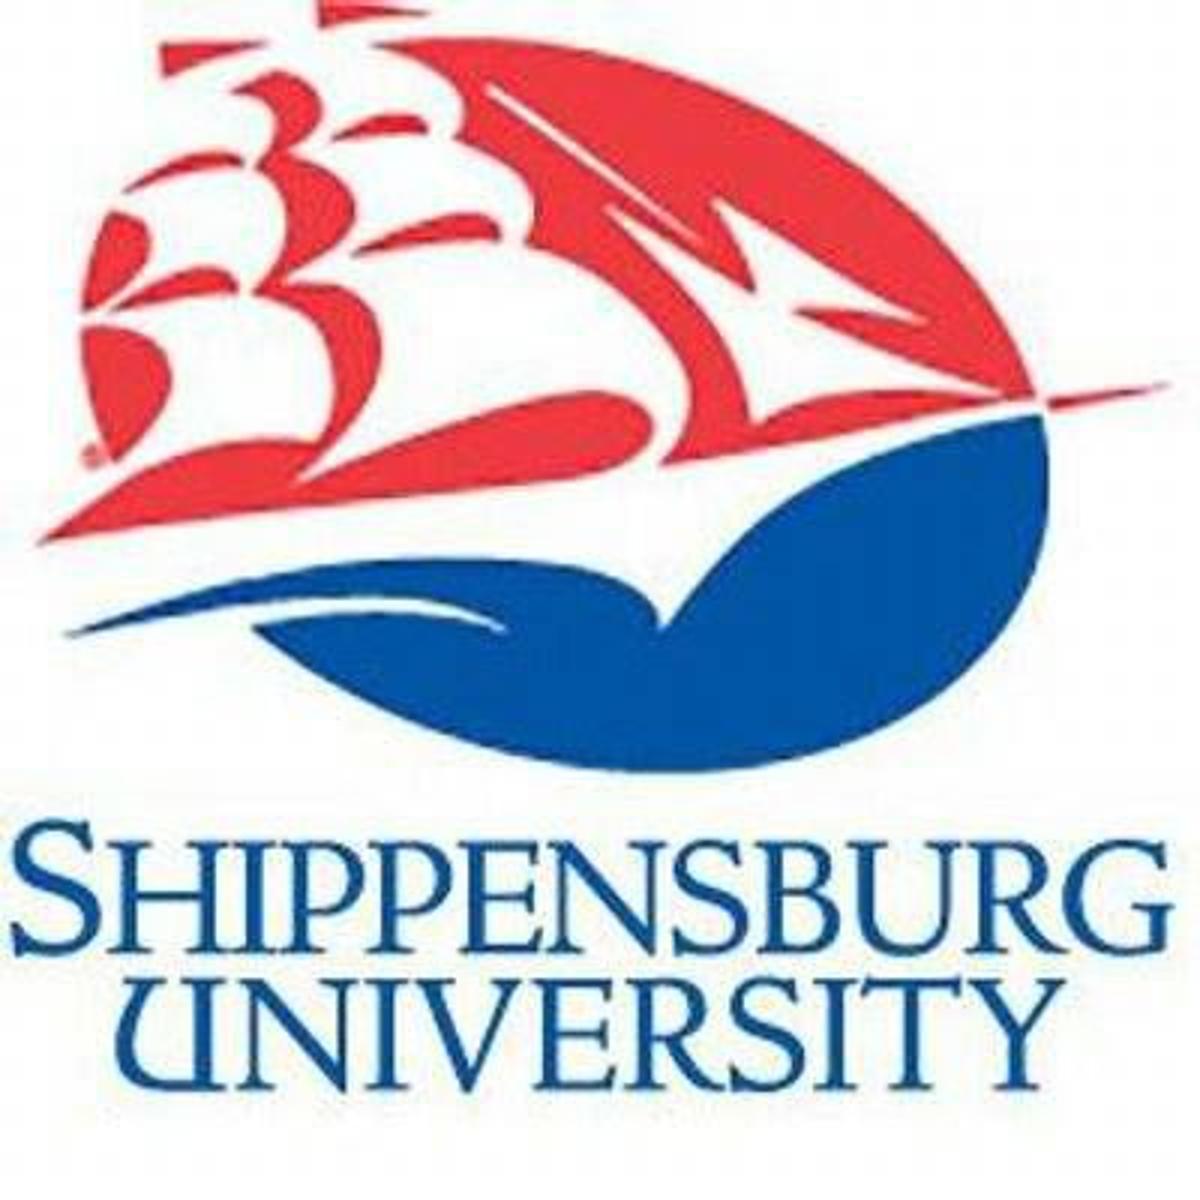 Shippensburg University – 50 Accelerated Online MPA Programs 2021